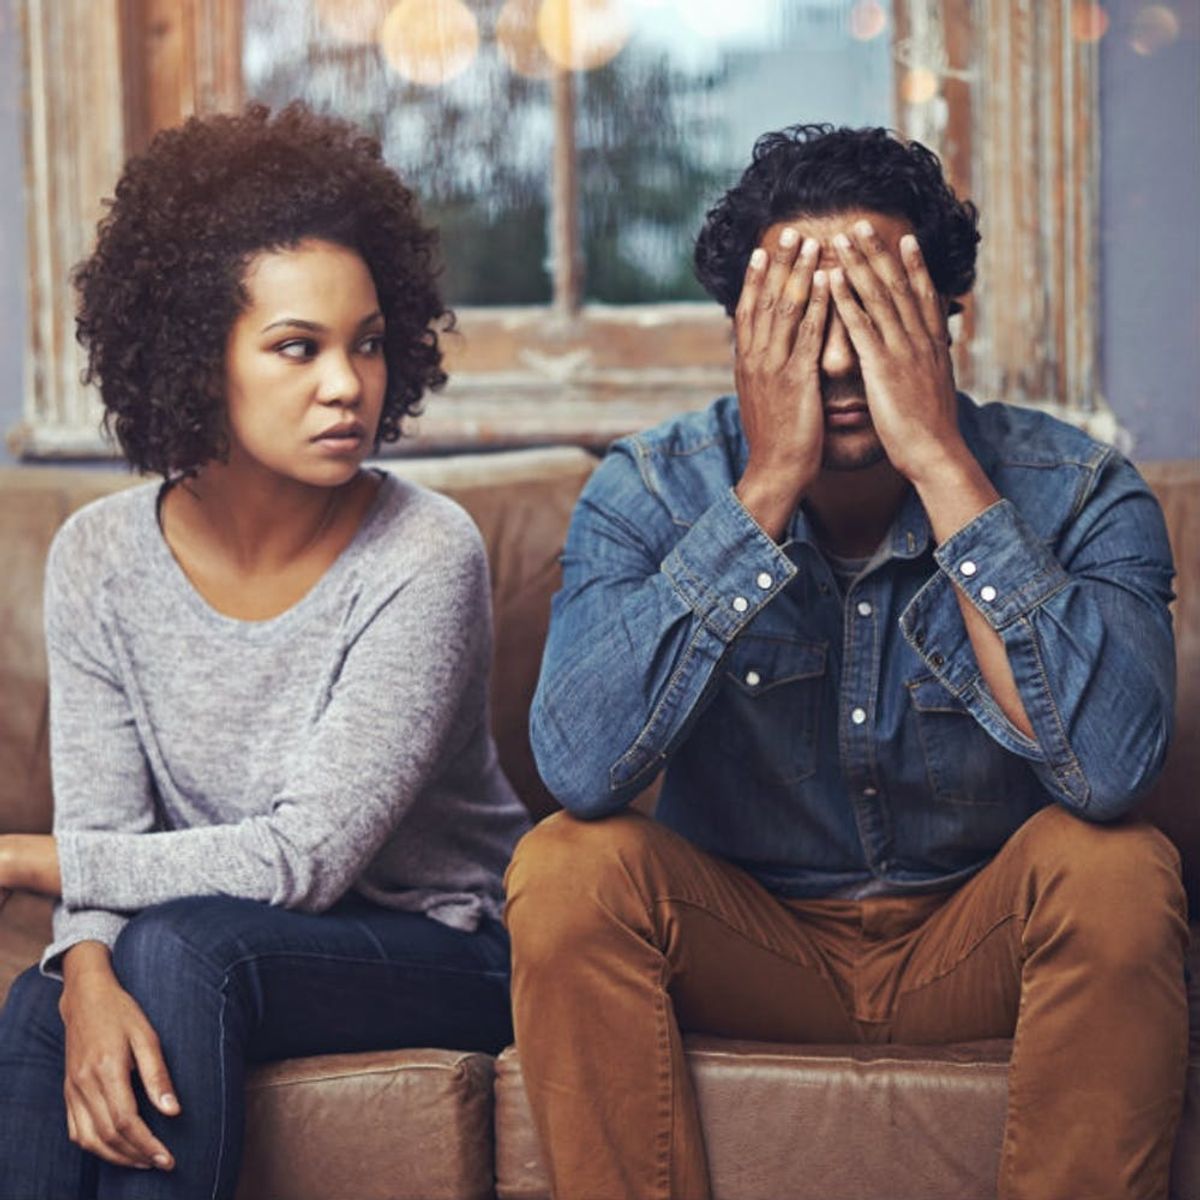 This Is the Reason Why People Stay in Unhappy Relationships